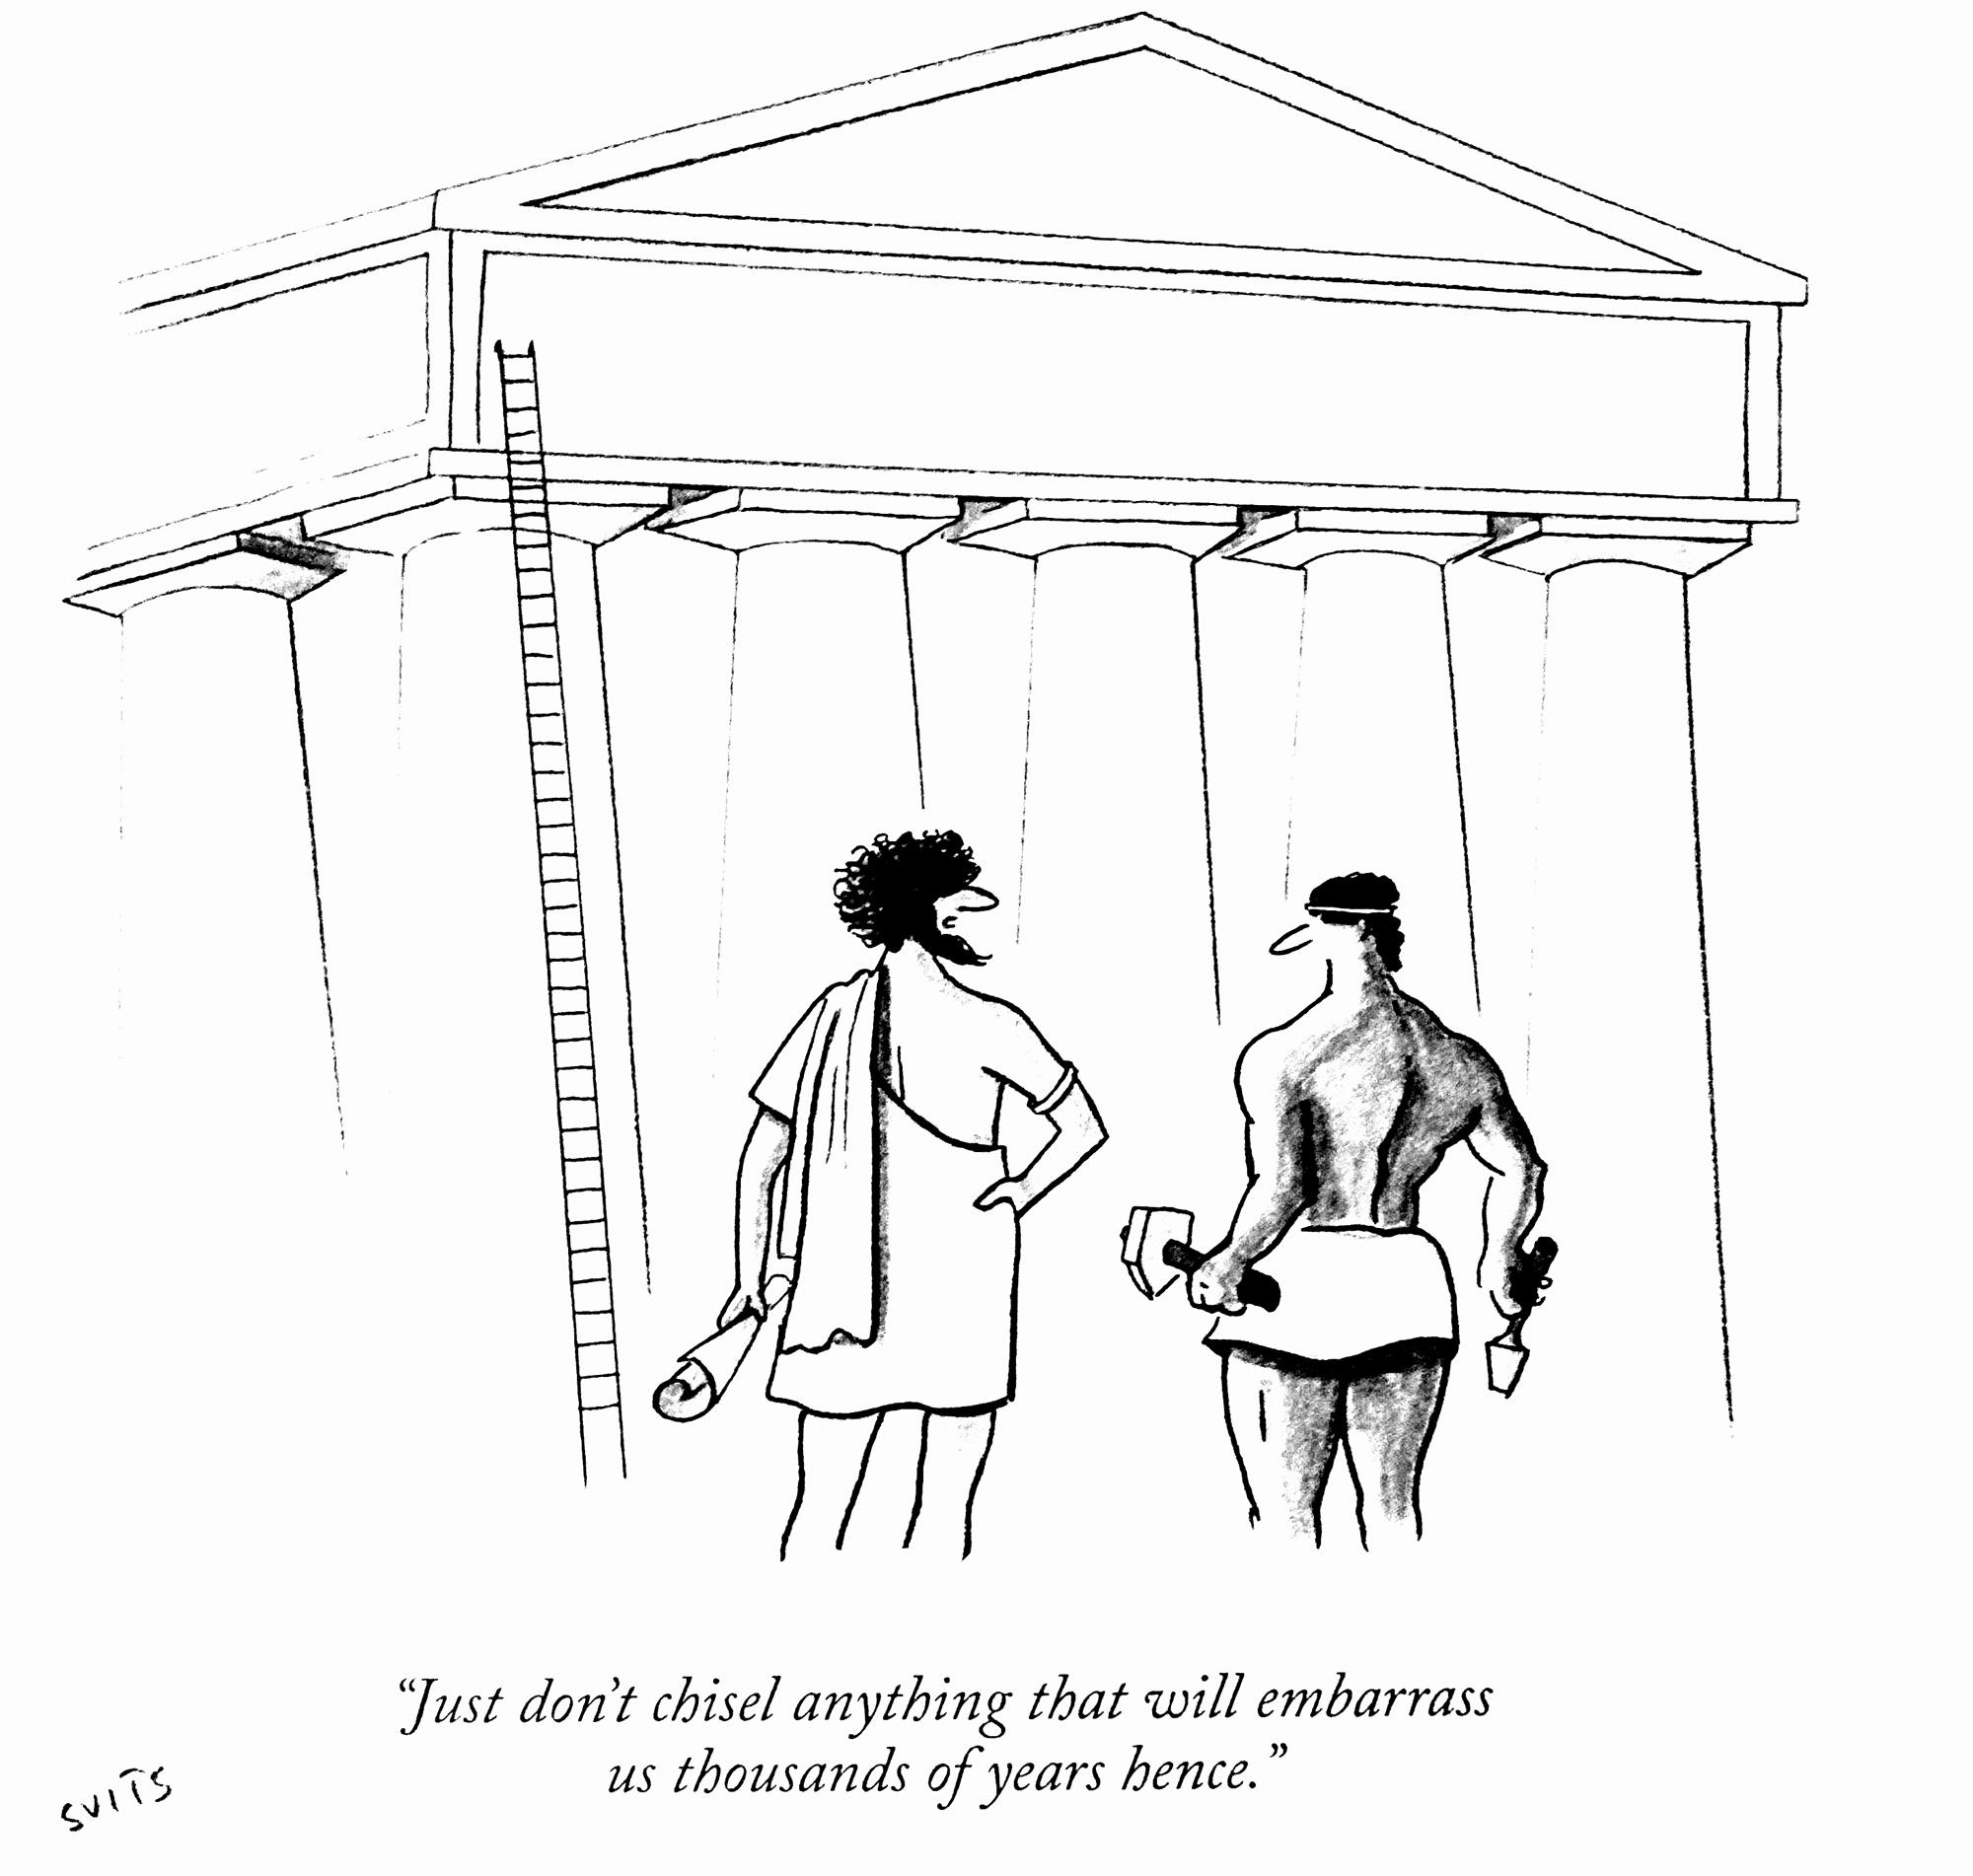 Courtesy of the New Yorker